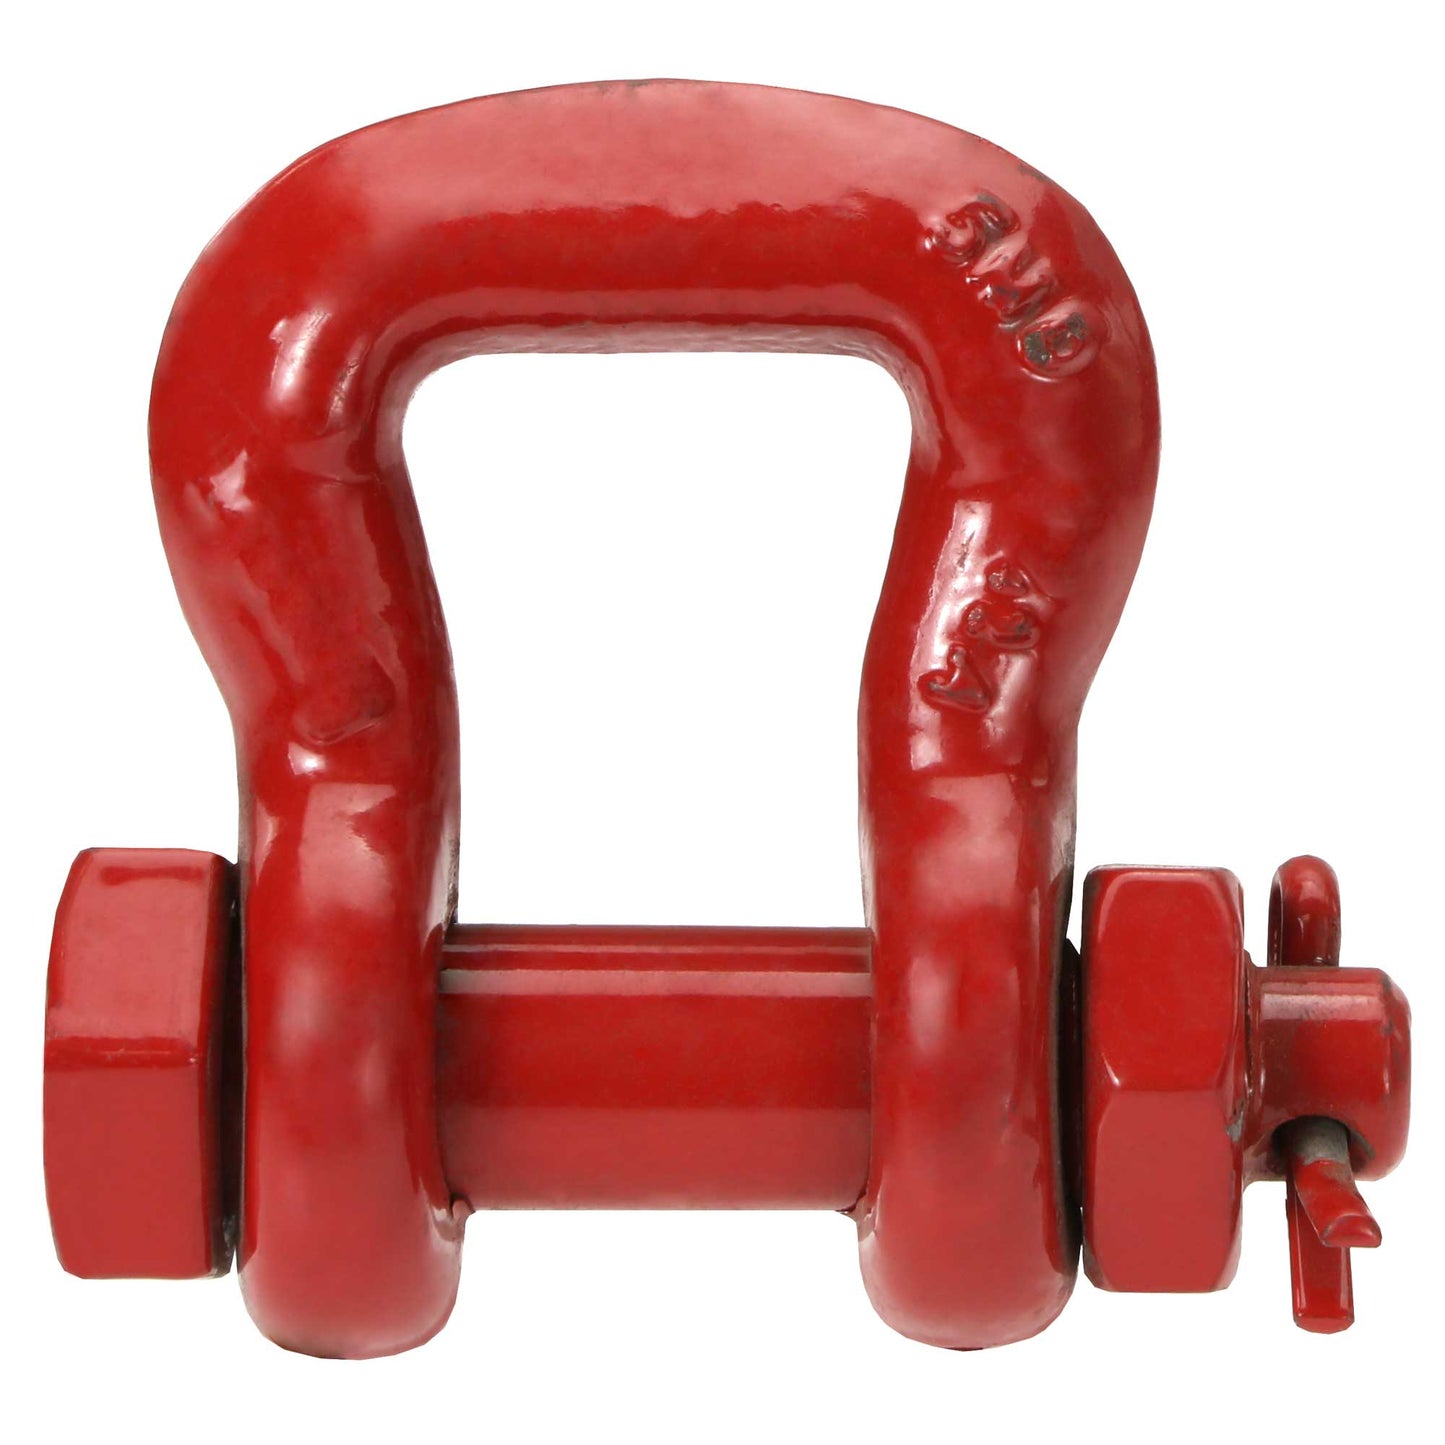 Crosby® Bolt Type Sling Saver Shackle | S-252 - 1-1/2"- 6.5 Ton primary image